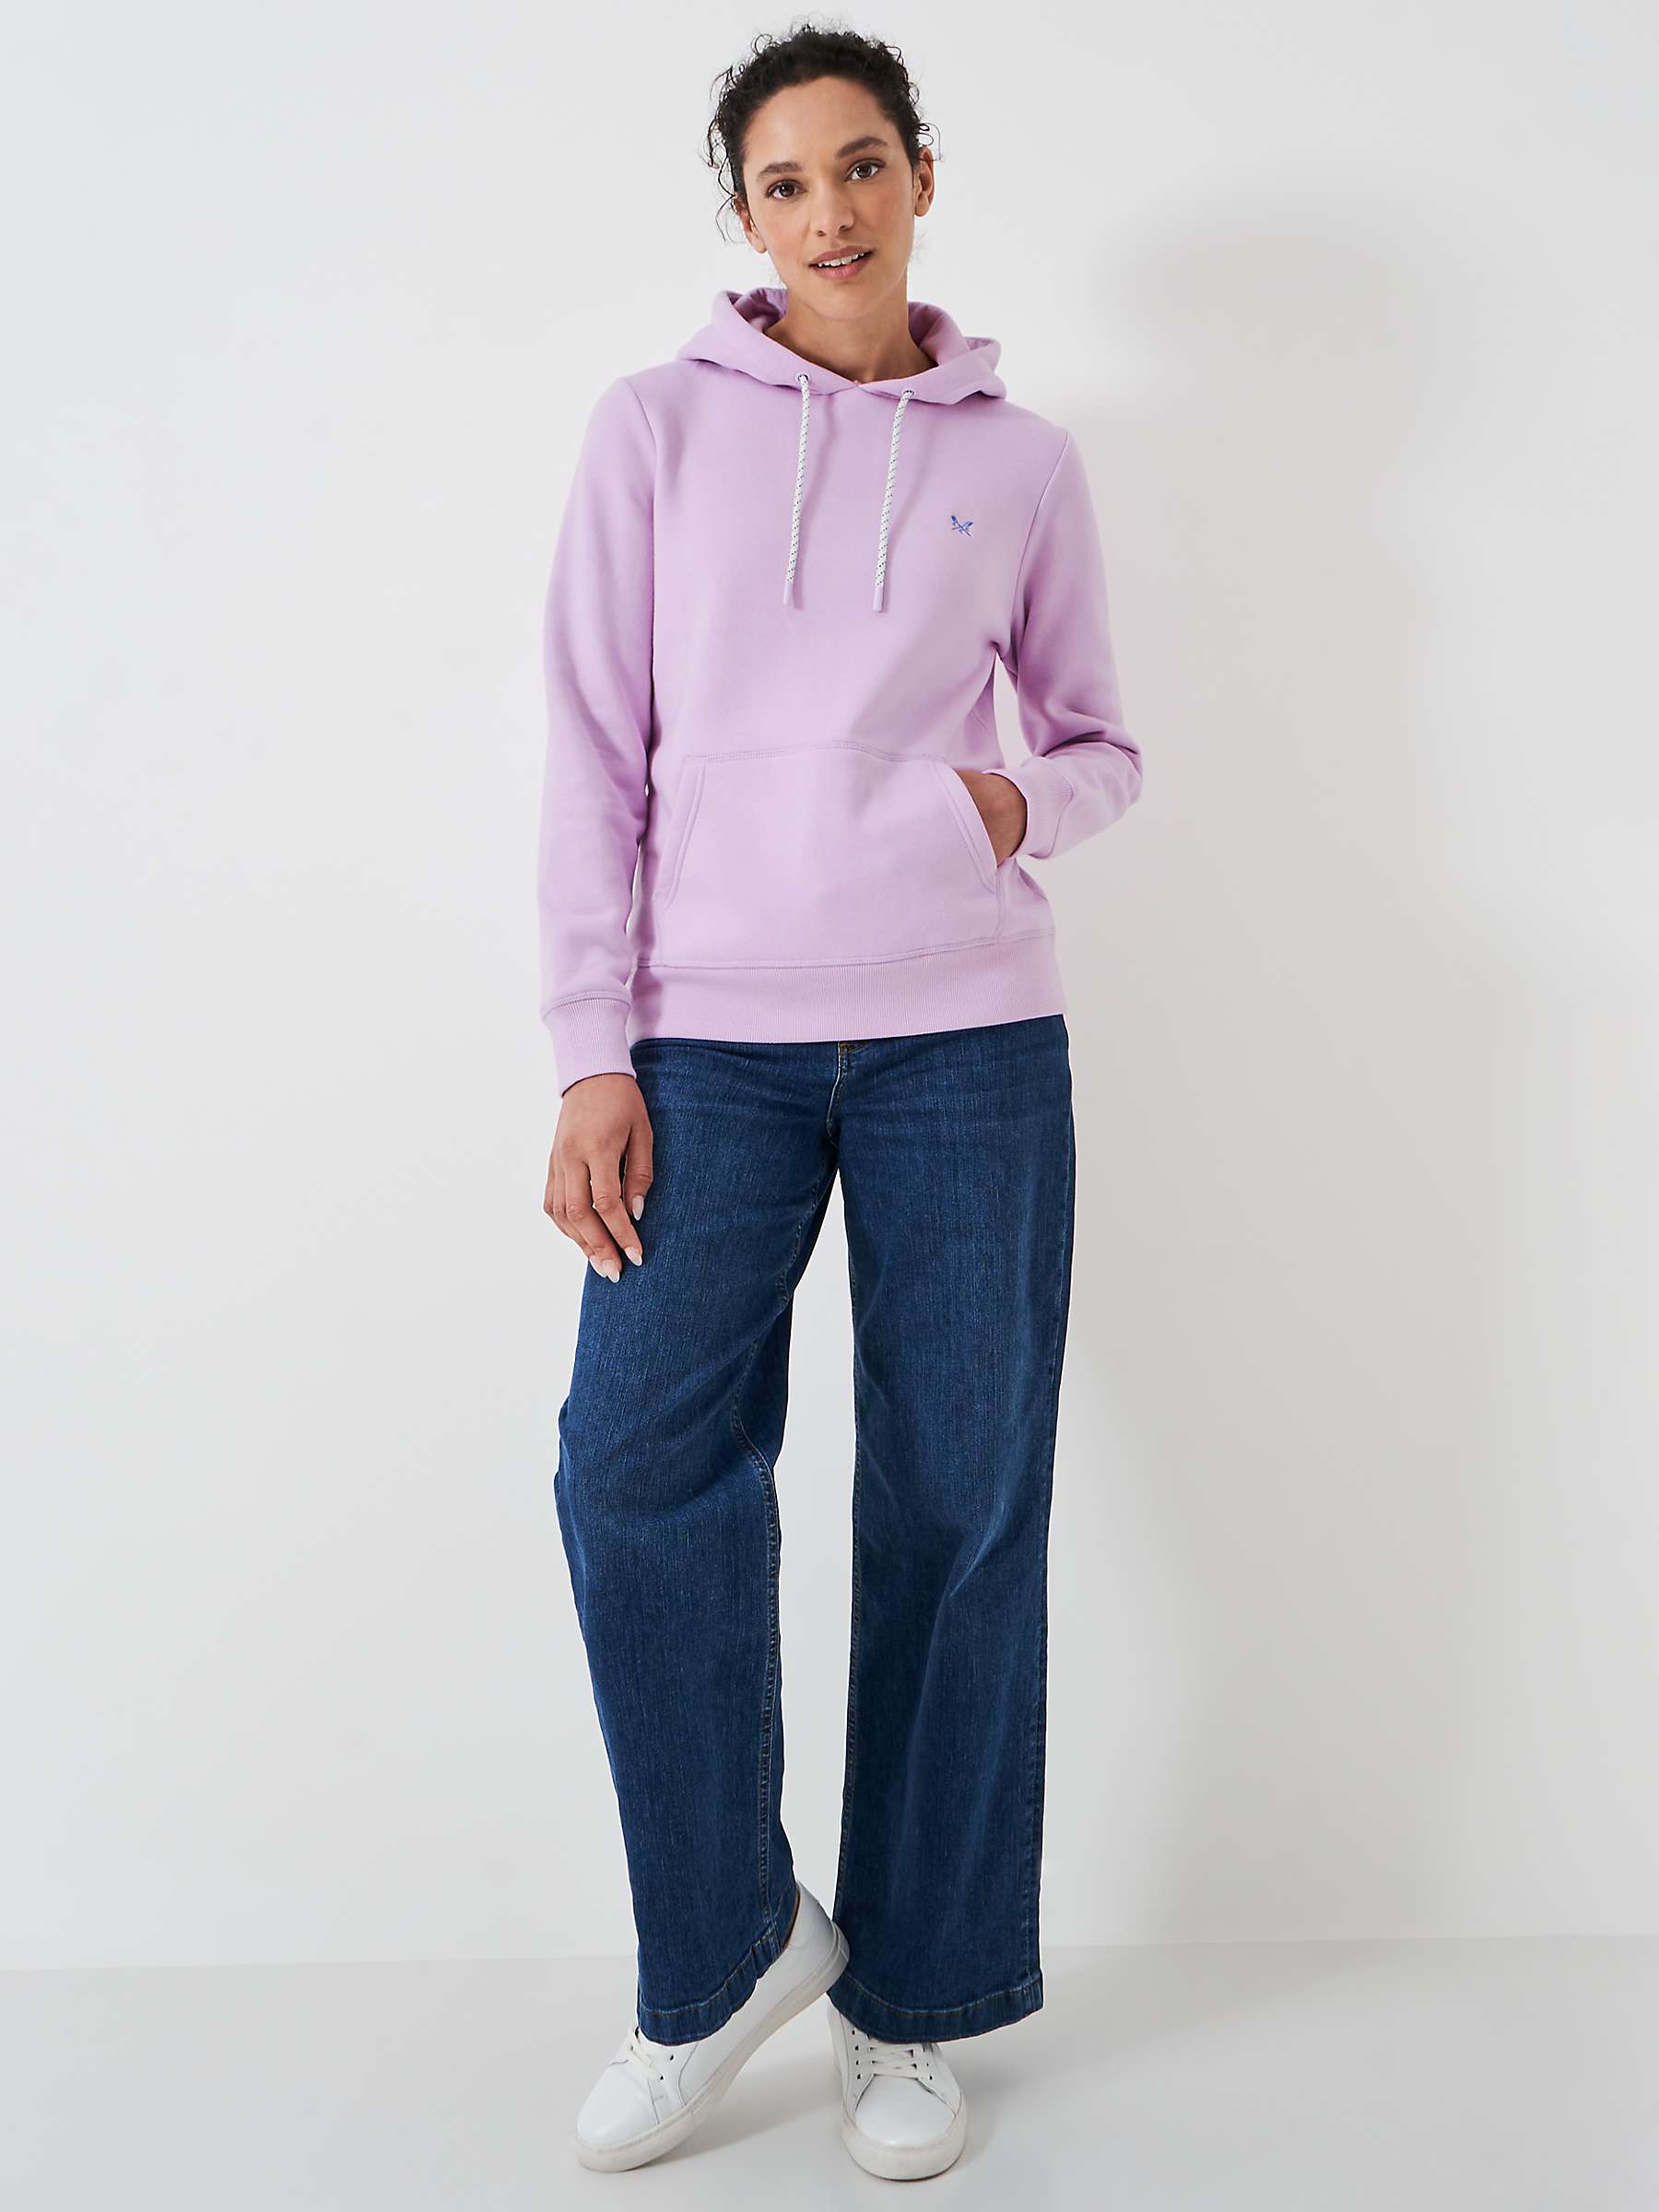 Buy Crew Clothing Cotton Blend Hoodie Online at johnlewis.com